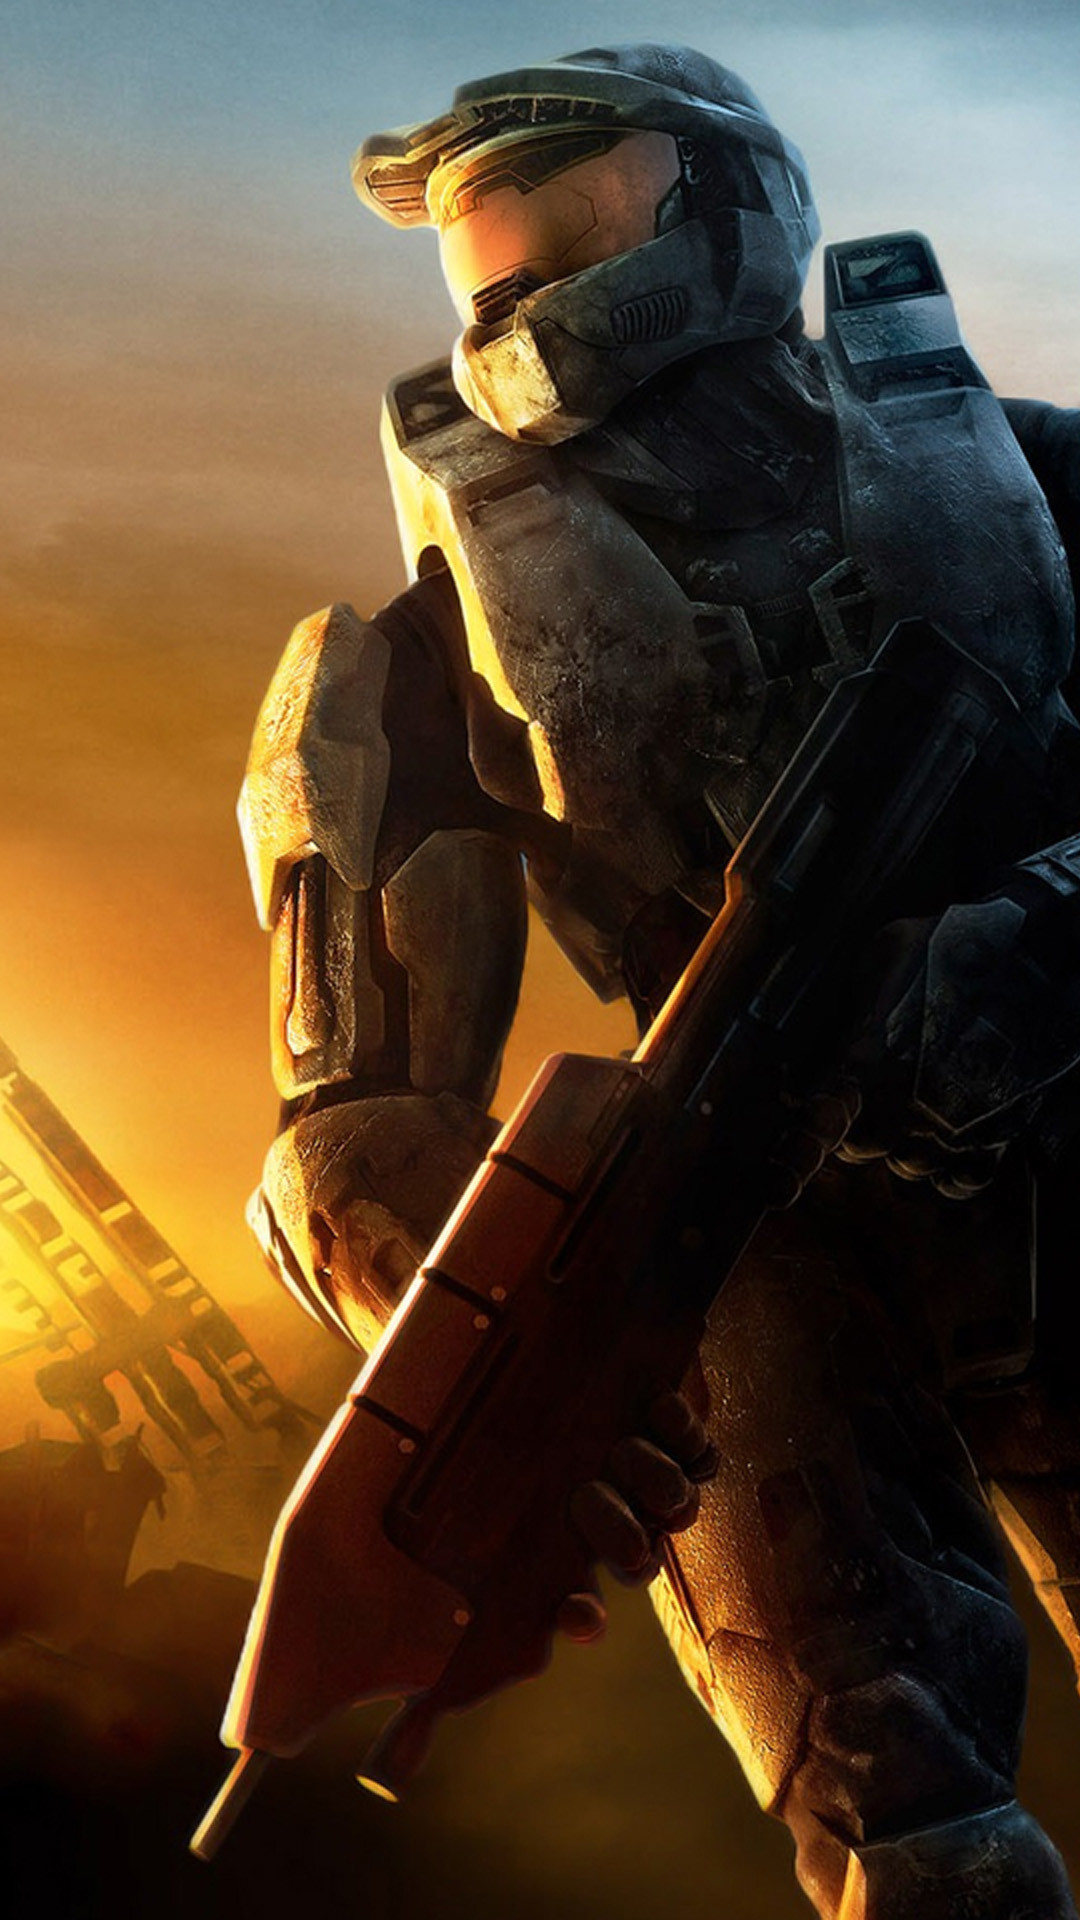 halo iphone wallpaper,action adventure game,shooter game,movie,action film,pc game